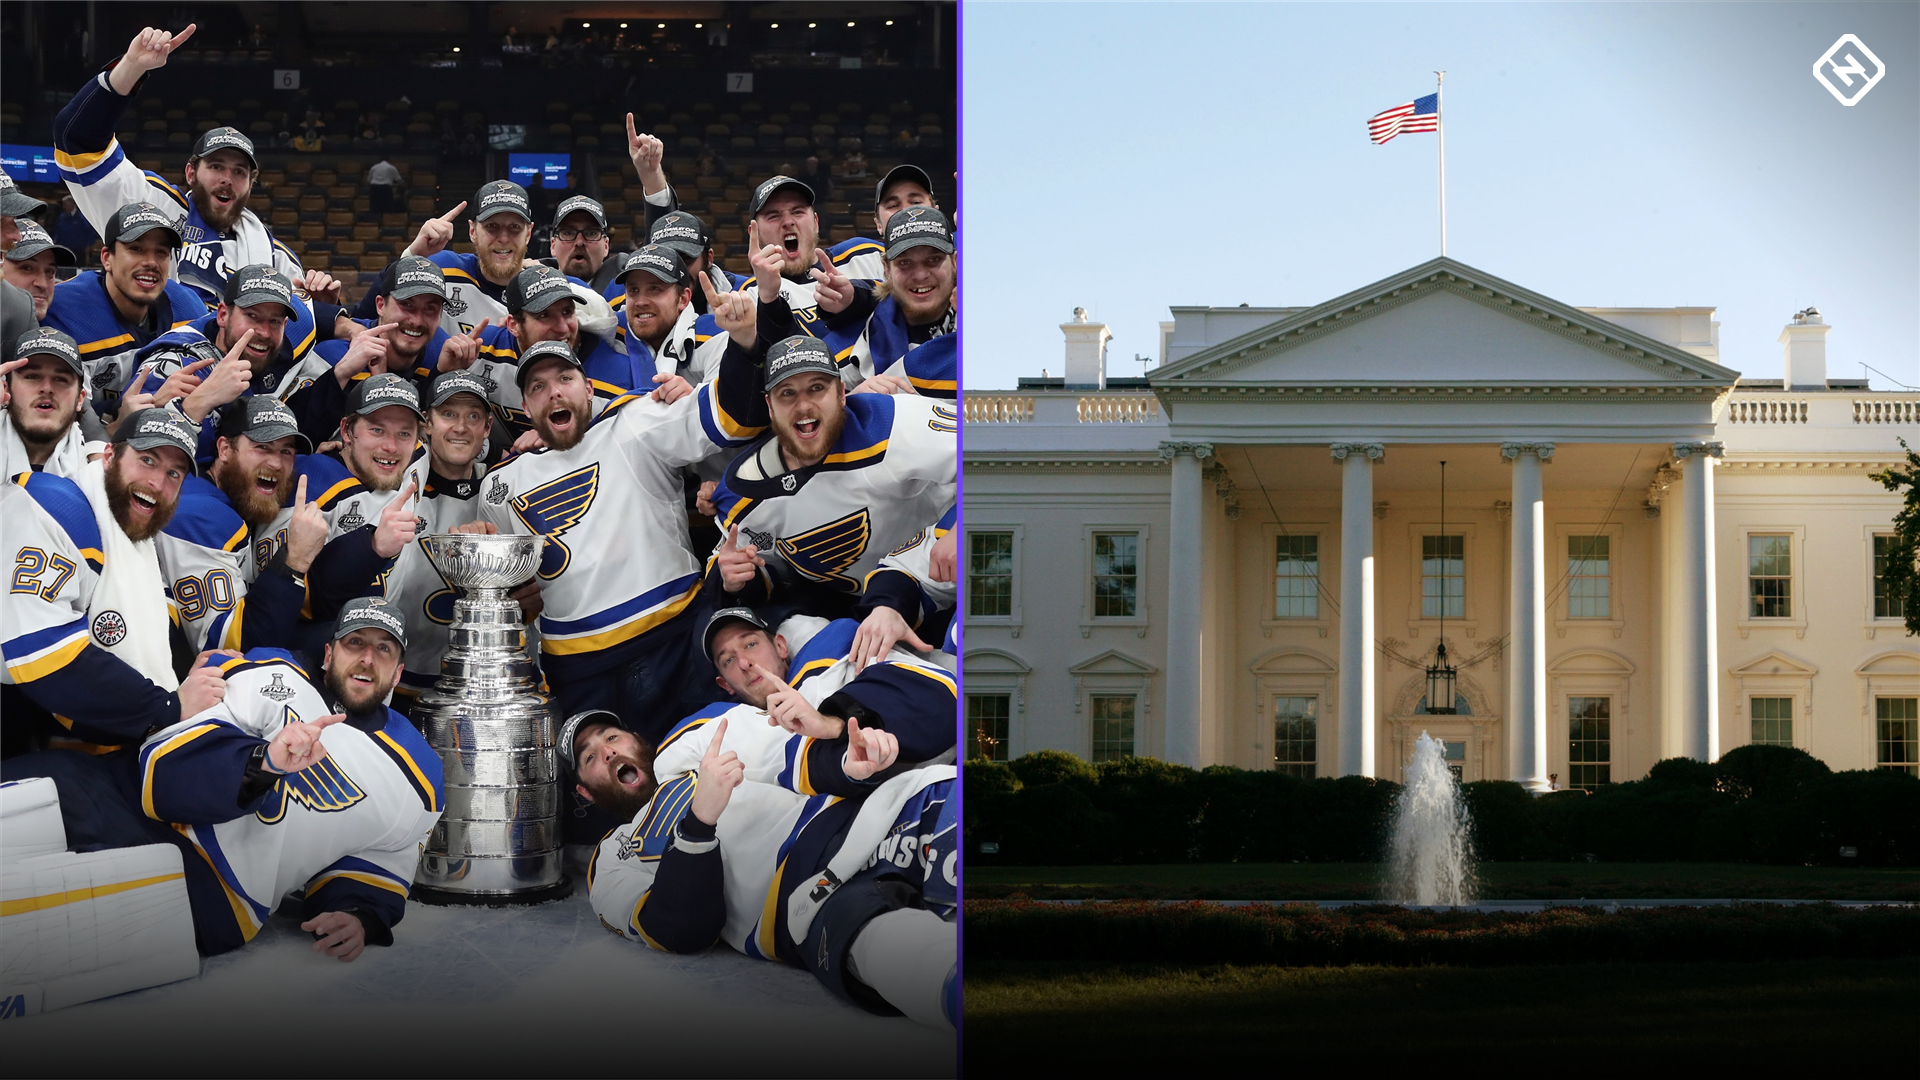 St. Louis Blues visit the White House | Sporting News Canada